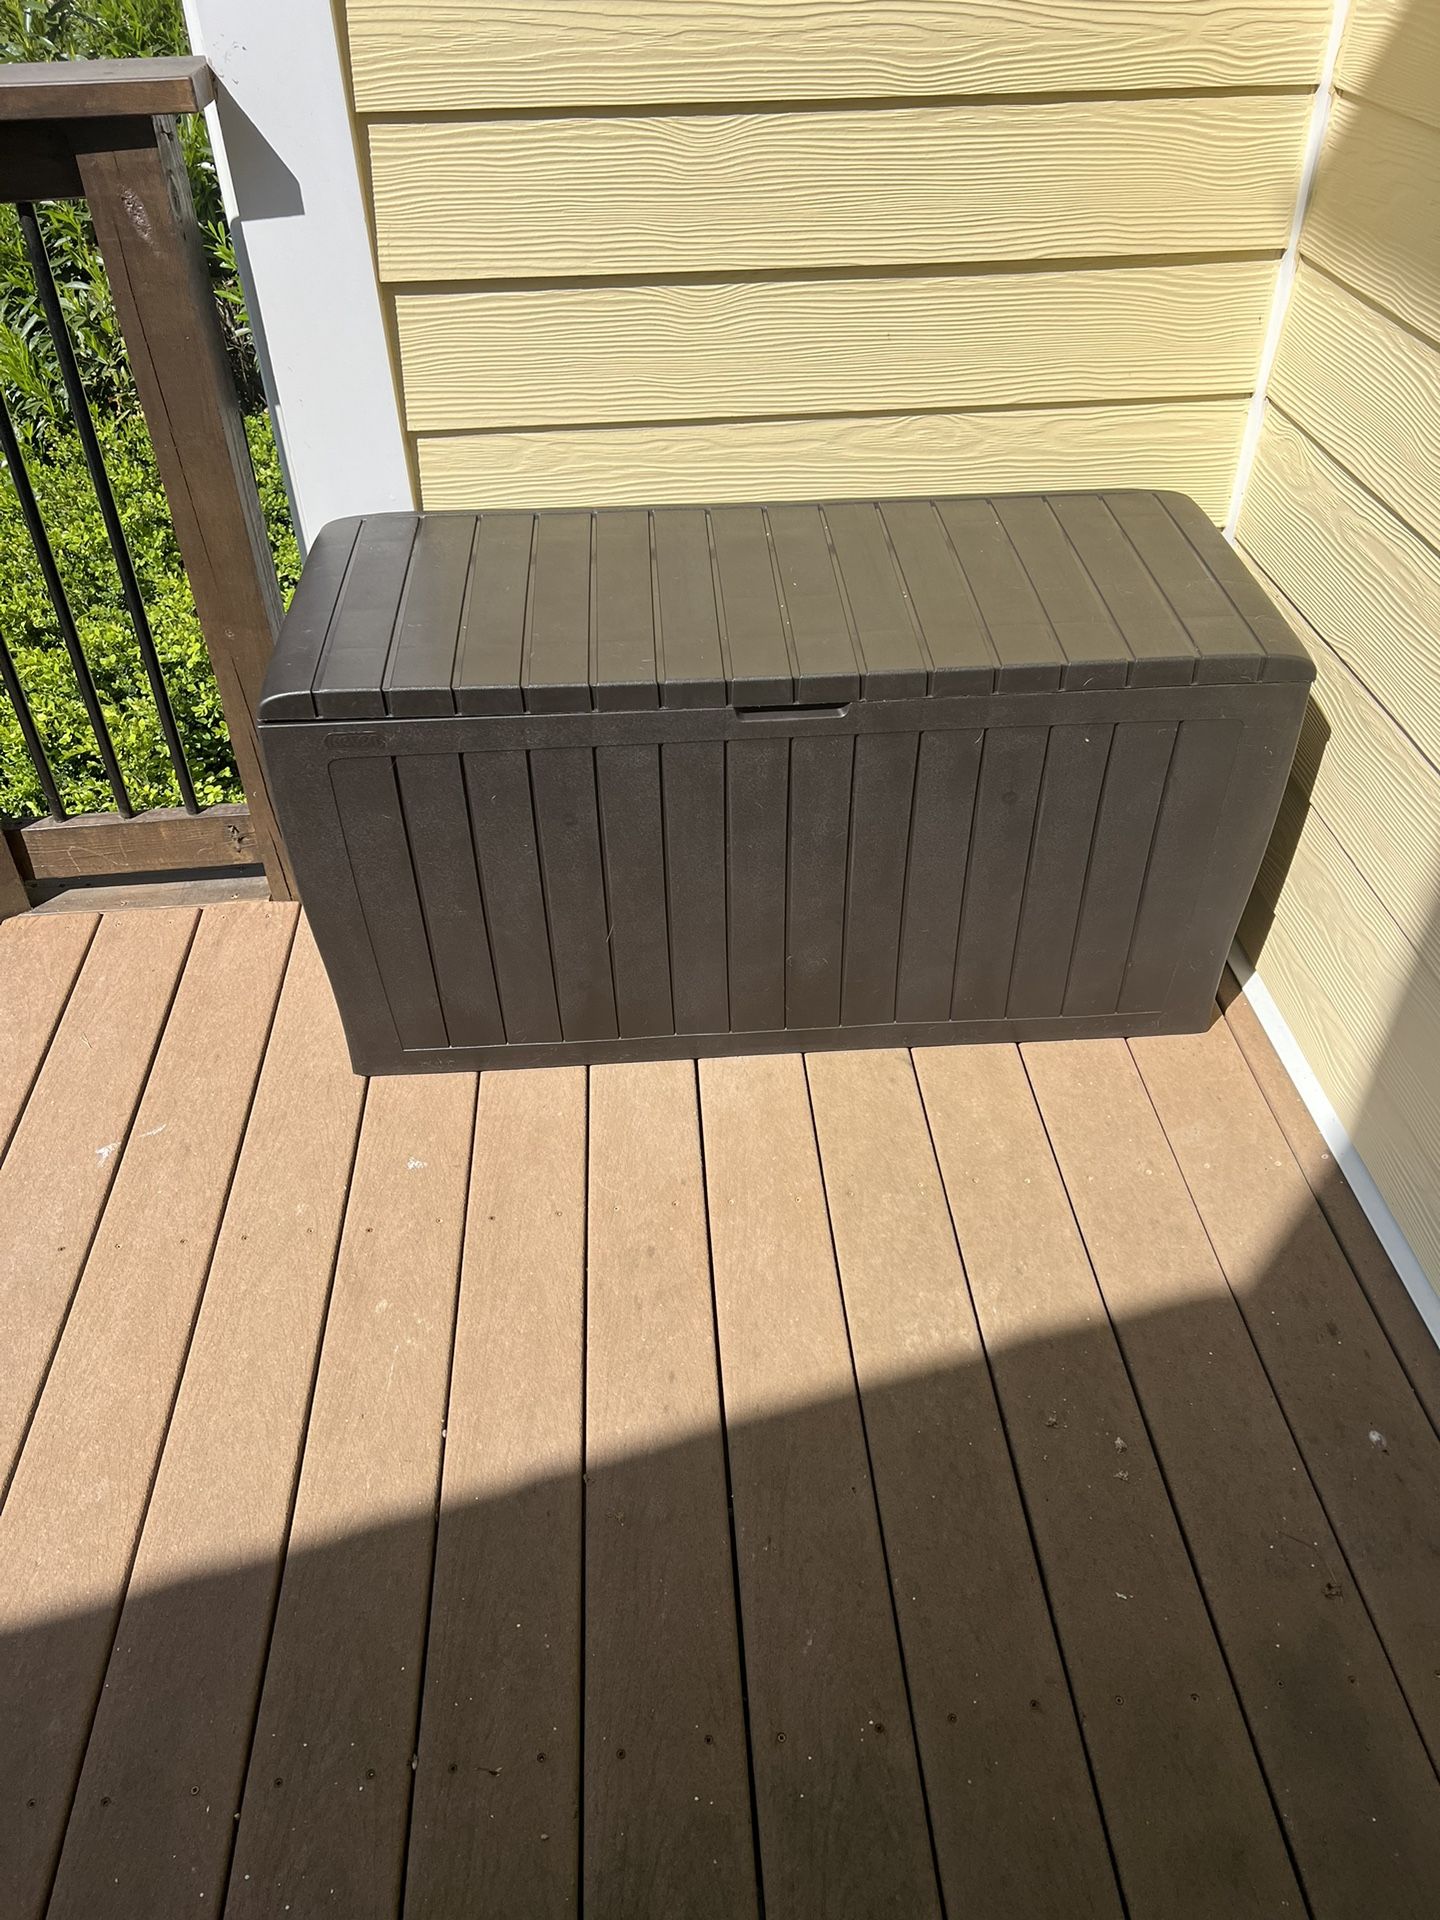 Brown Outdoor Deck Box Storage -Weather-Resistant"  For sale: A brown, durable Outdoor Deck Box, great for storing outdoor items. 